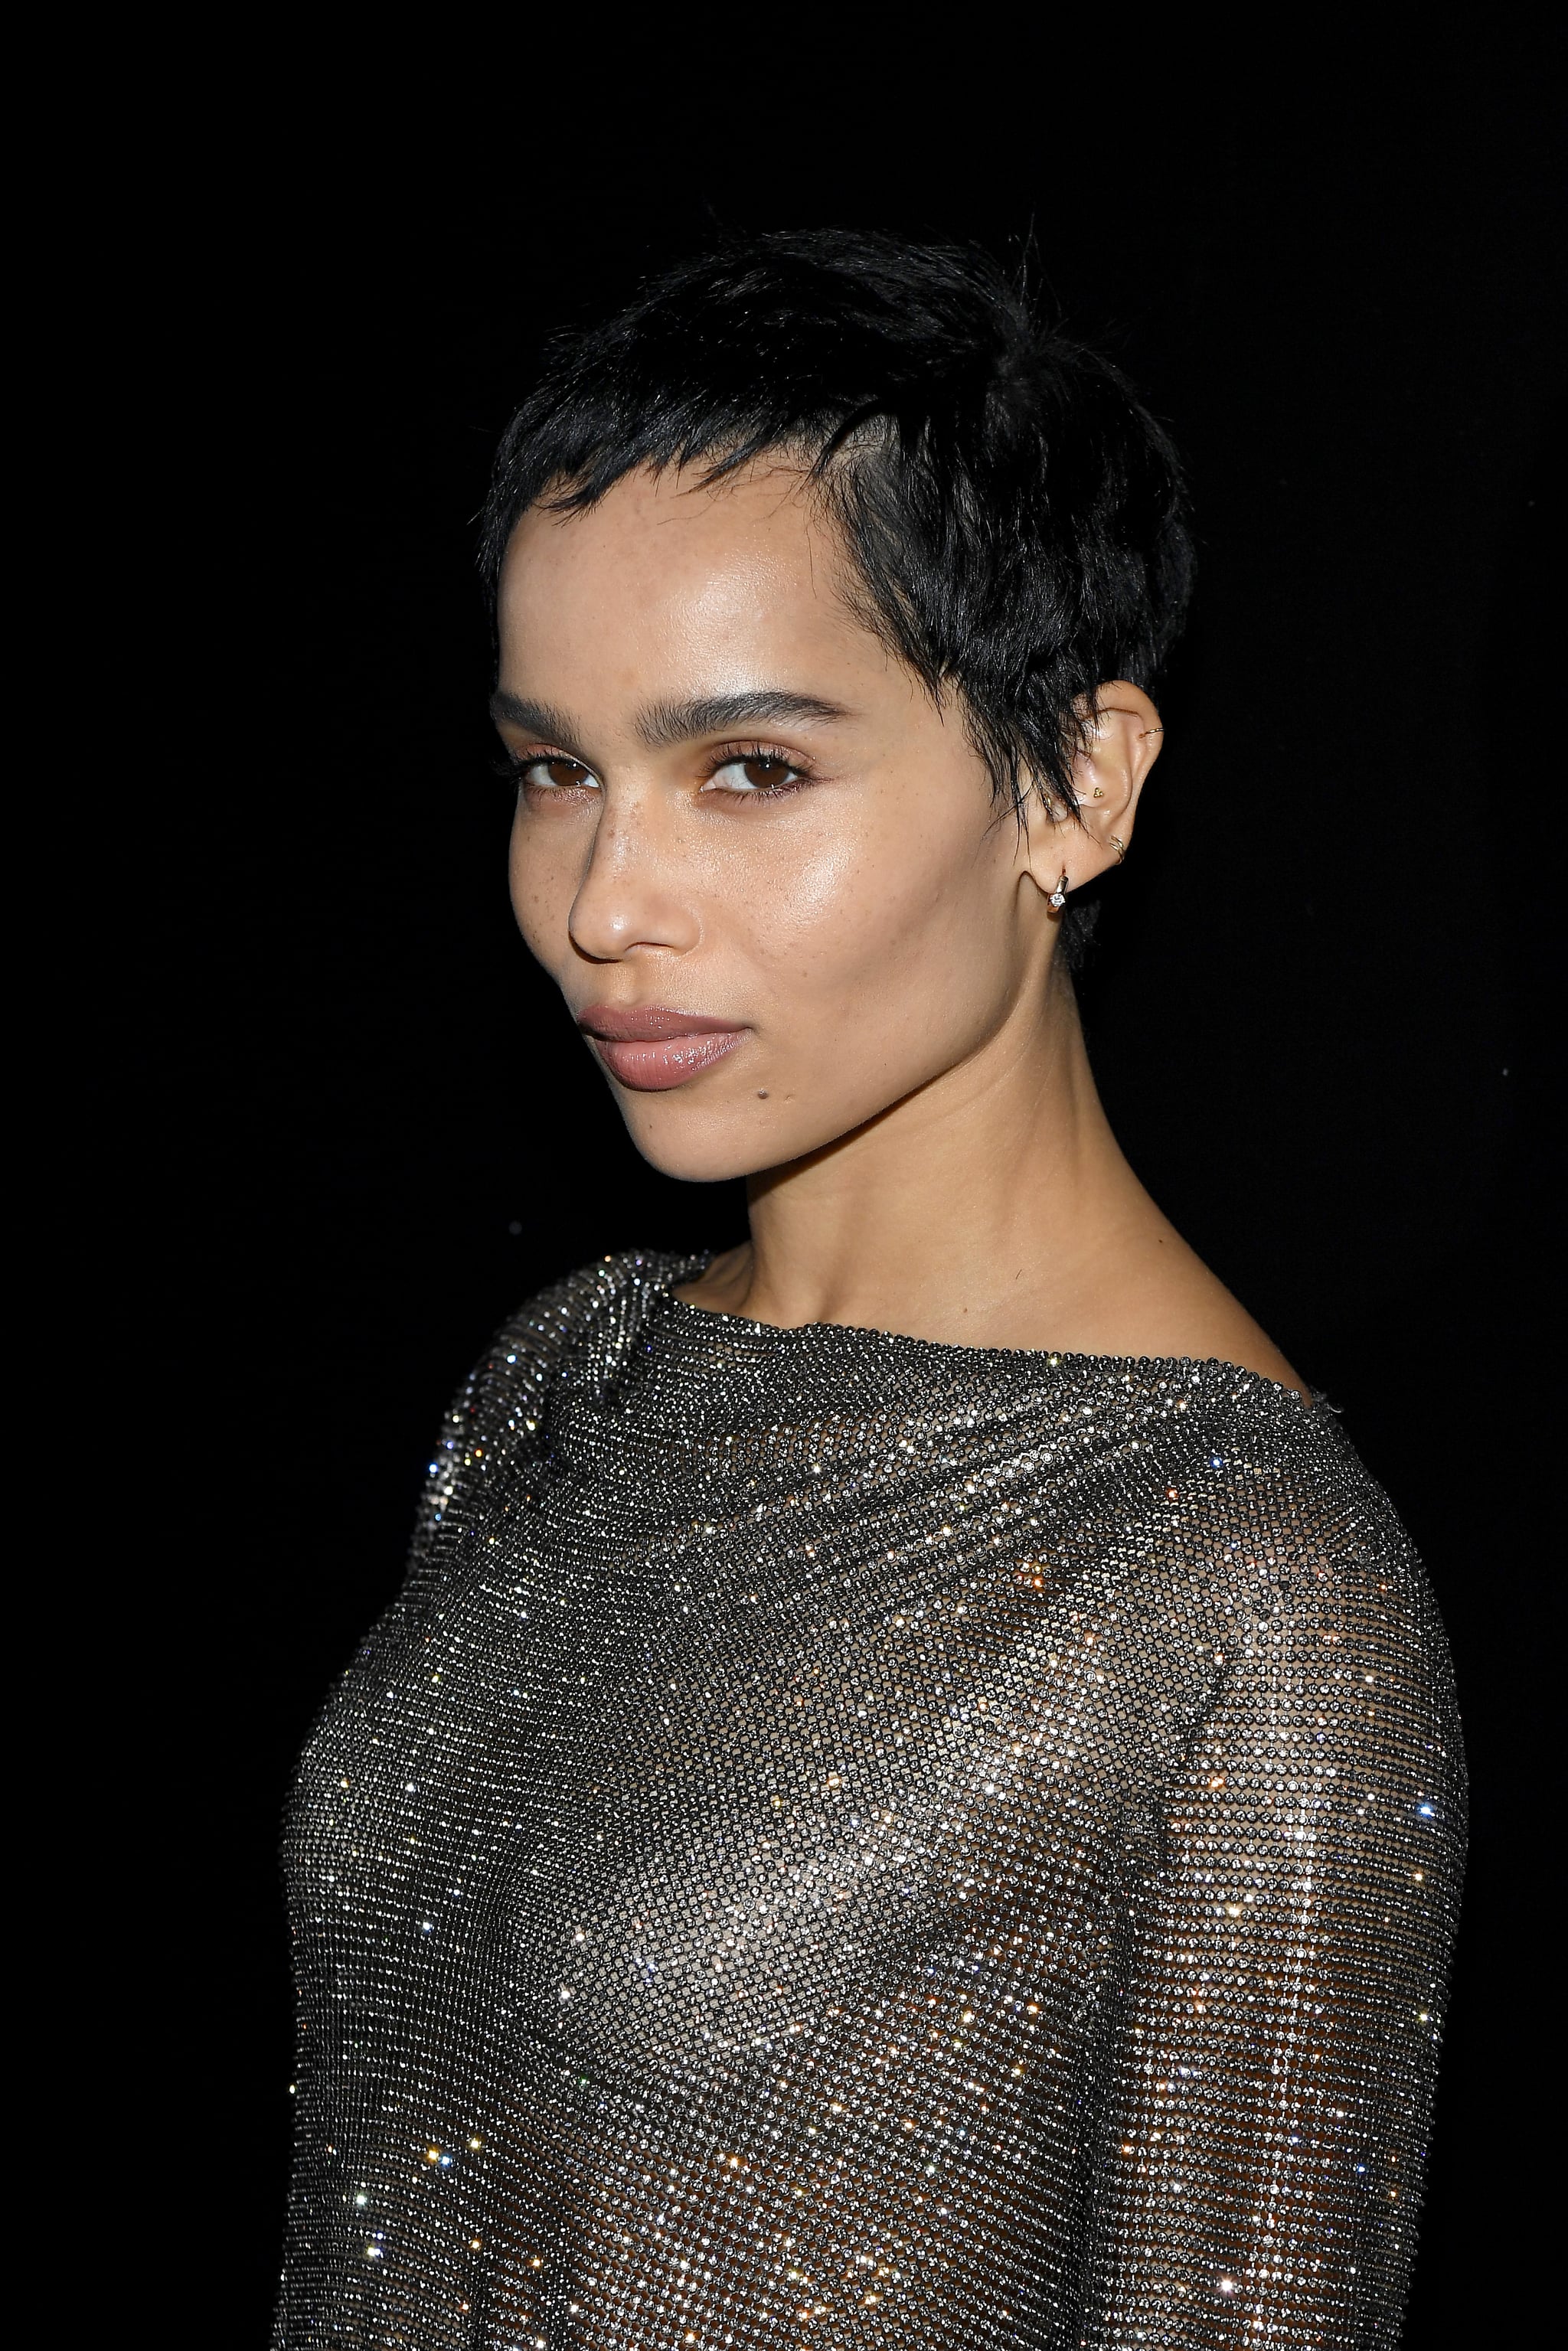 PARIS, FRANCE - FEBRUARY 25: (EDITORIAL USE ONLY) Zoe Kravitz attends the Saint Laurent show as part of the Paris Fashion Week Womenswear Fall/Winter 2020/2021 on February 25, 2020 in Paris, France. (Photo by Pascal Le Segretain/Getty Images)